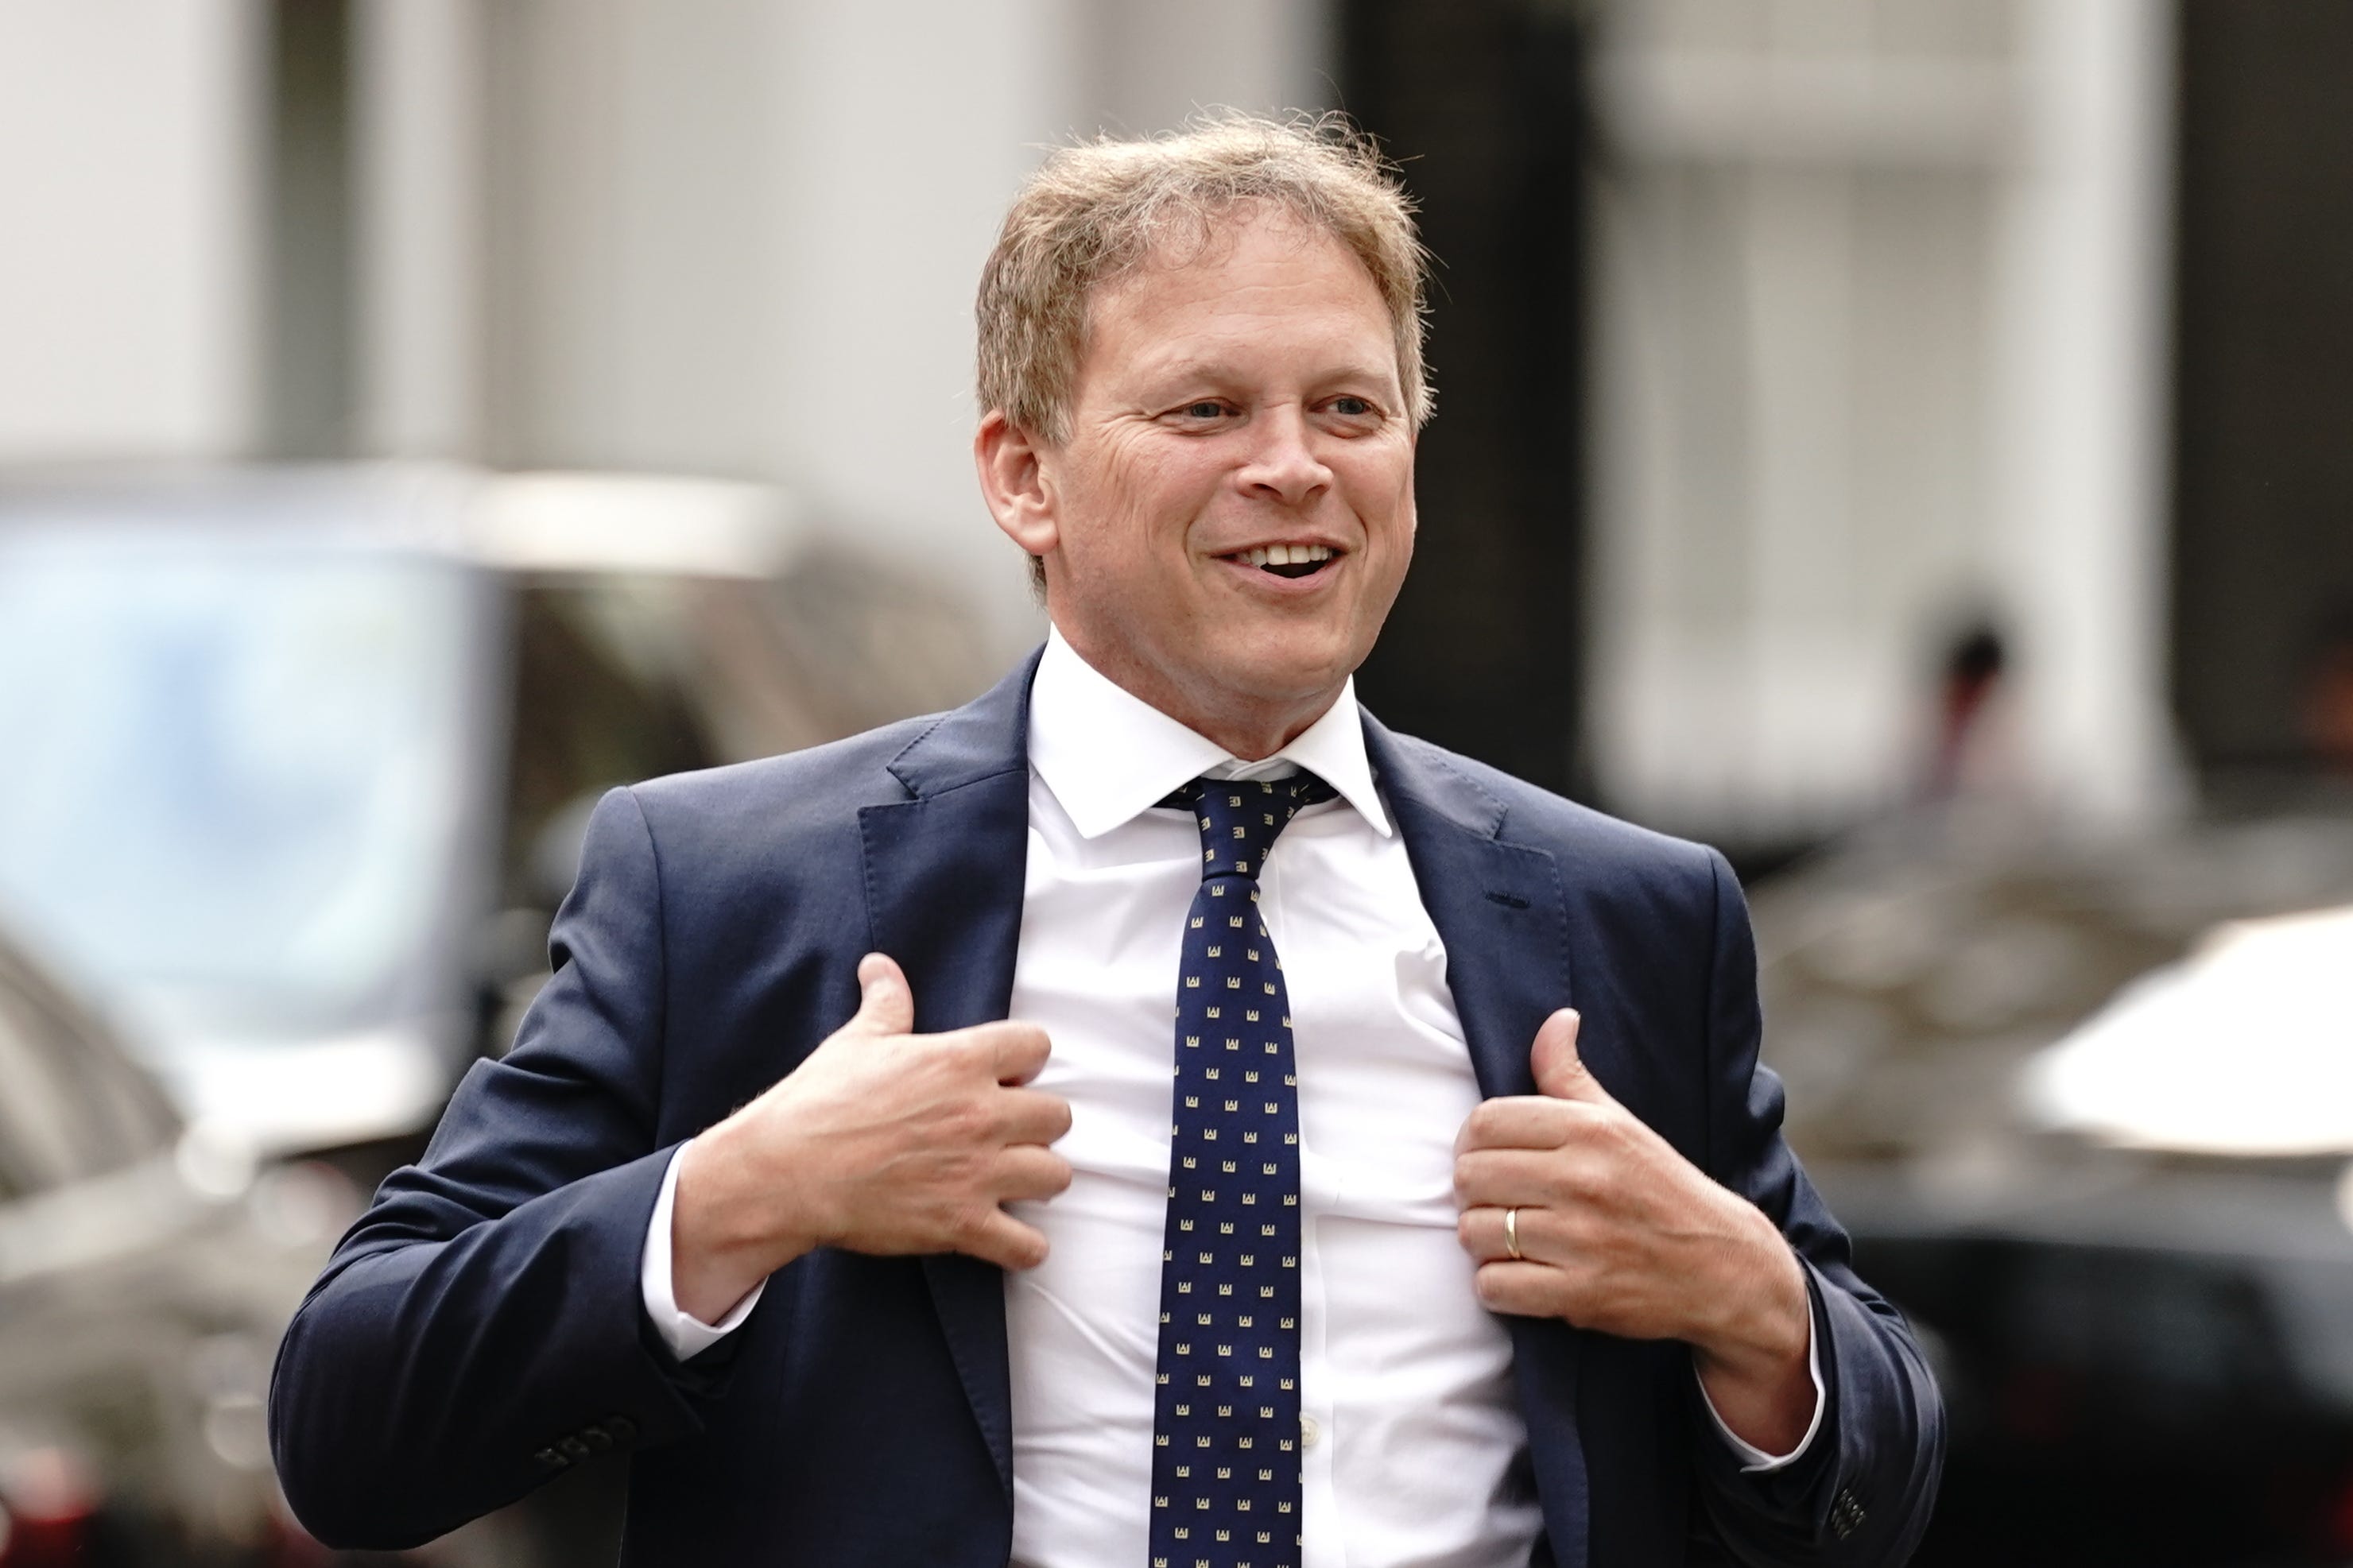 Shapps’s bizarre digital past is well documented